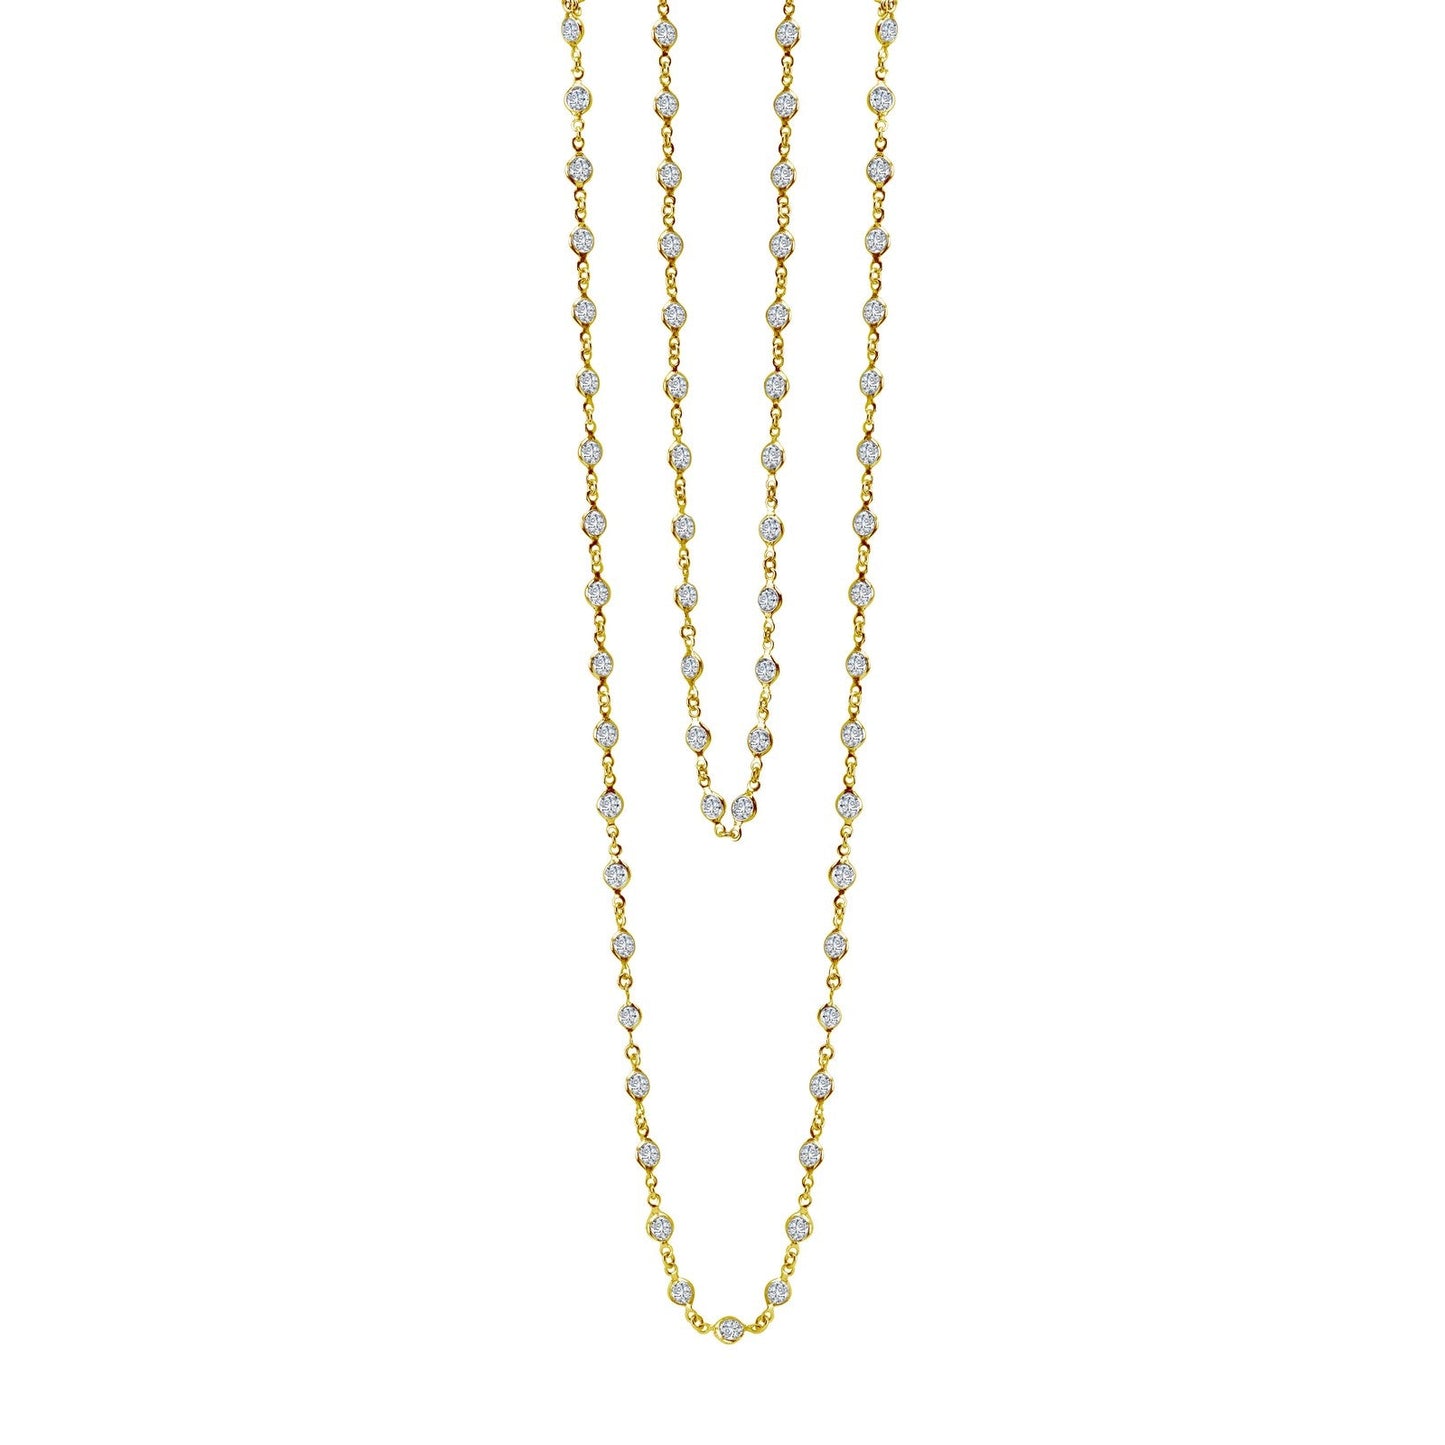 Lafonn Classic Station Necklace 35 Stone Count N0009CLG16